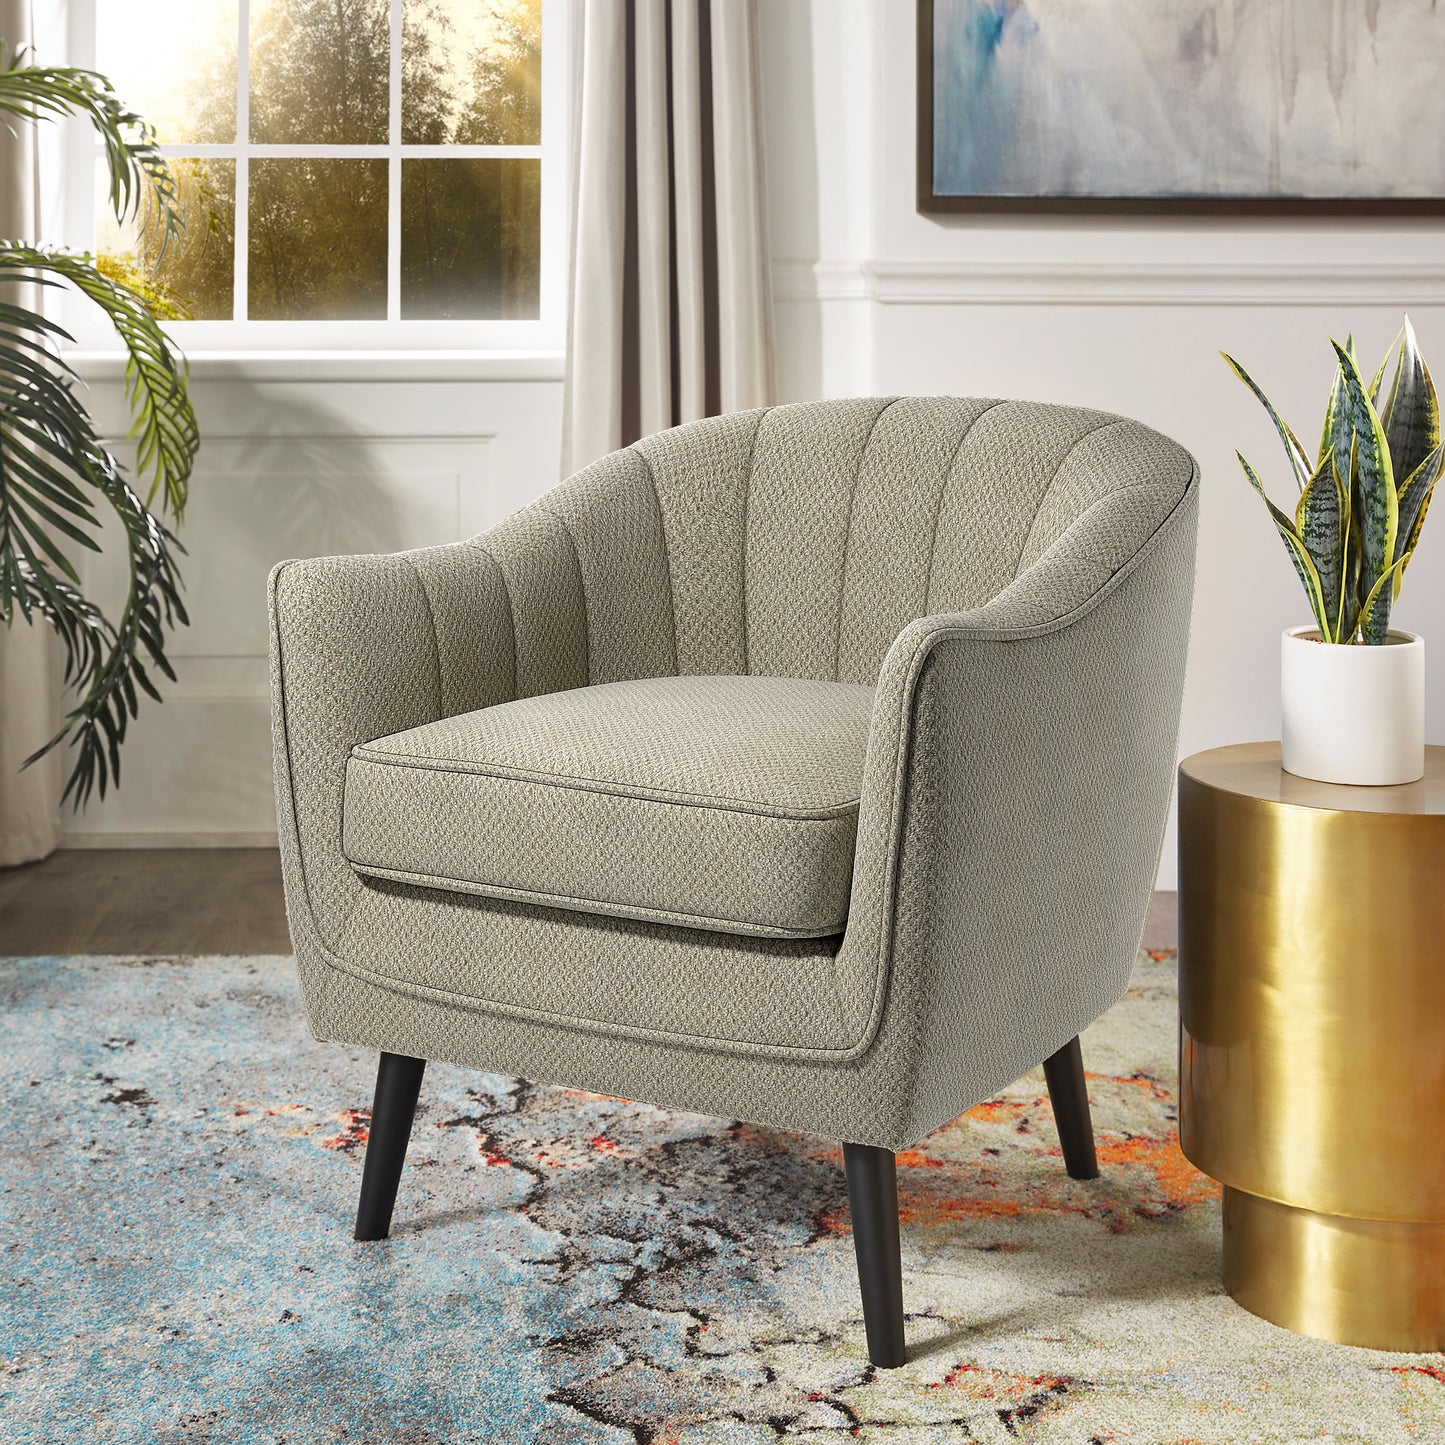 Mid-Century Modern Channel-Tufted Accent Chair with Removable Cushion Cover - Grey